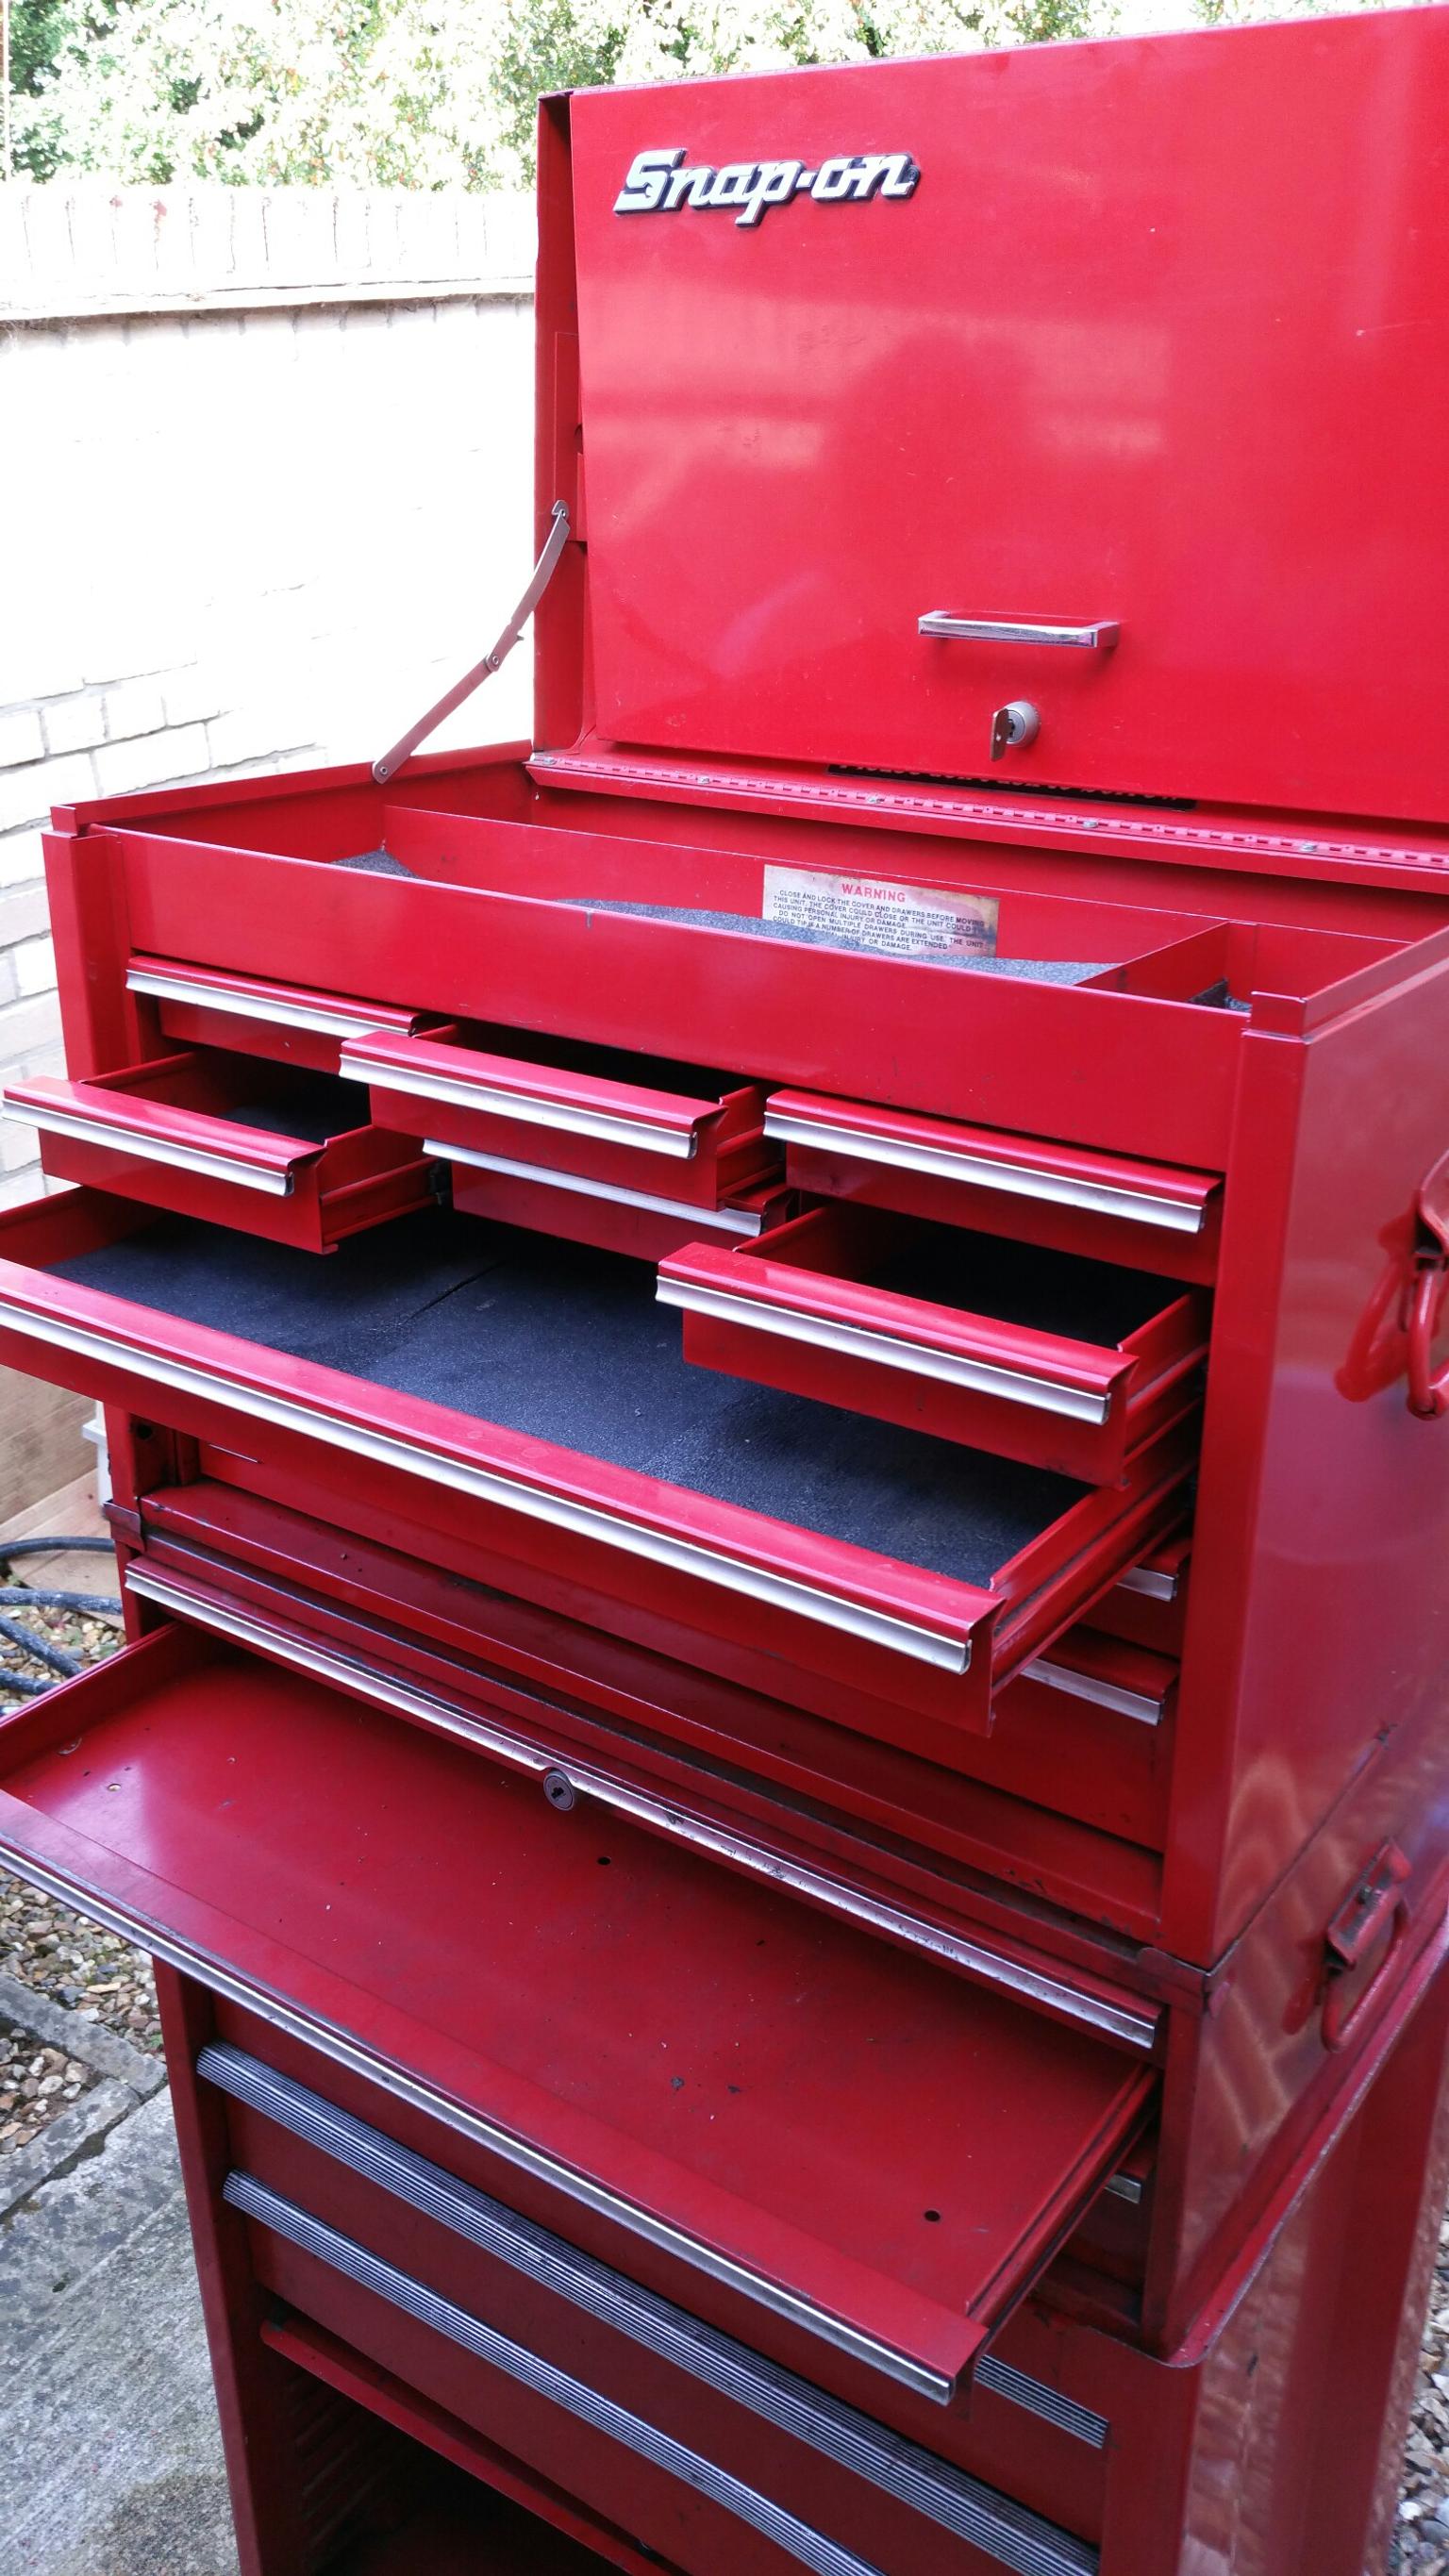 2 Snap On Tool Boxes And Beach Roller Cabine In Cb6 Wilburton Fur